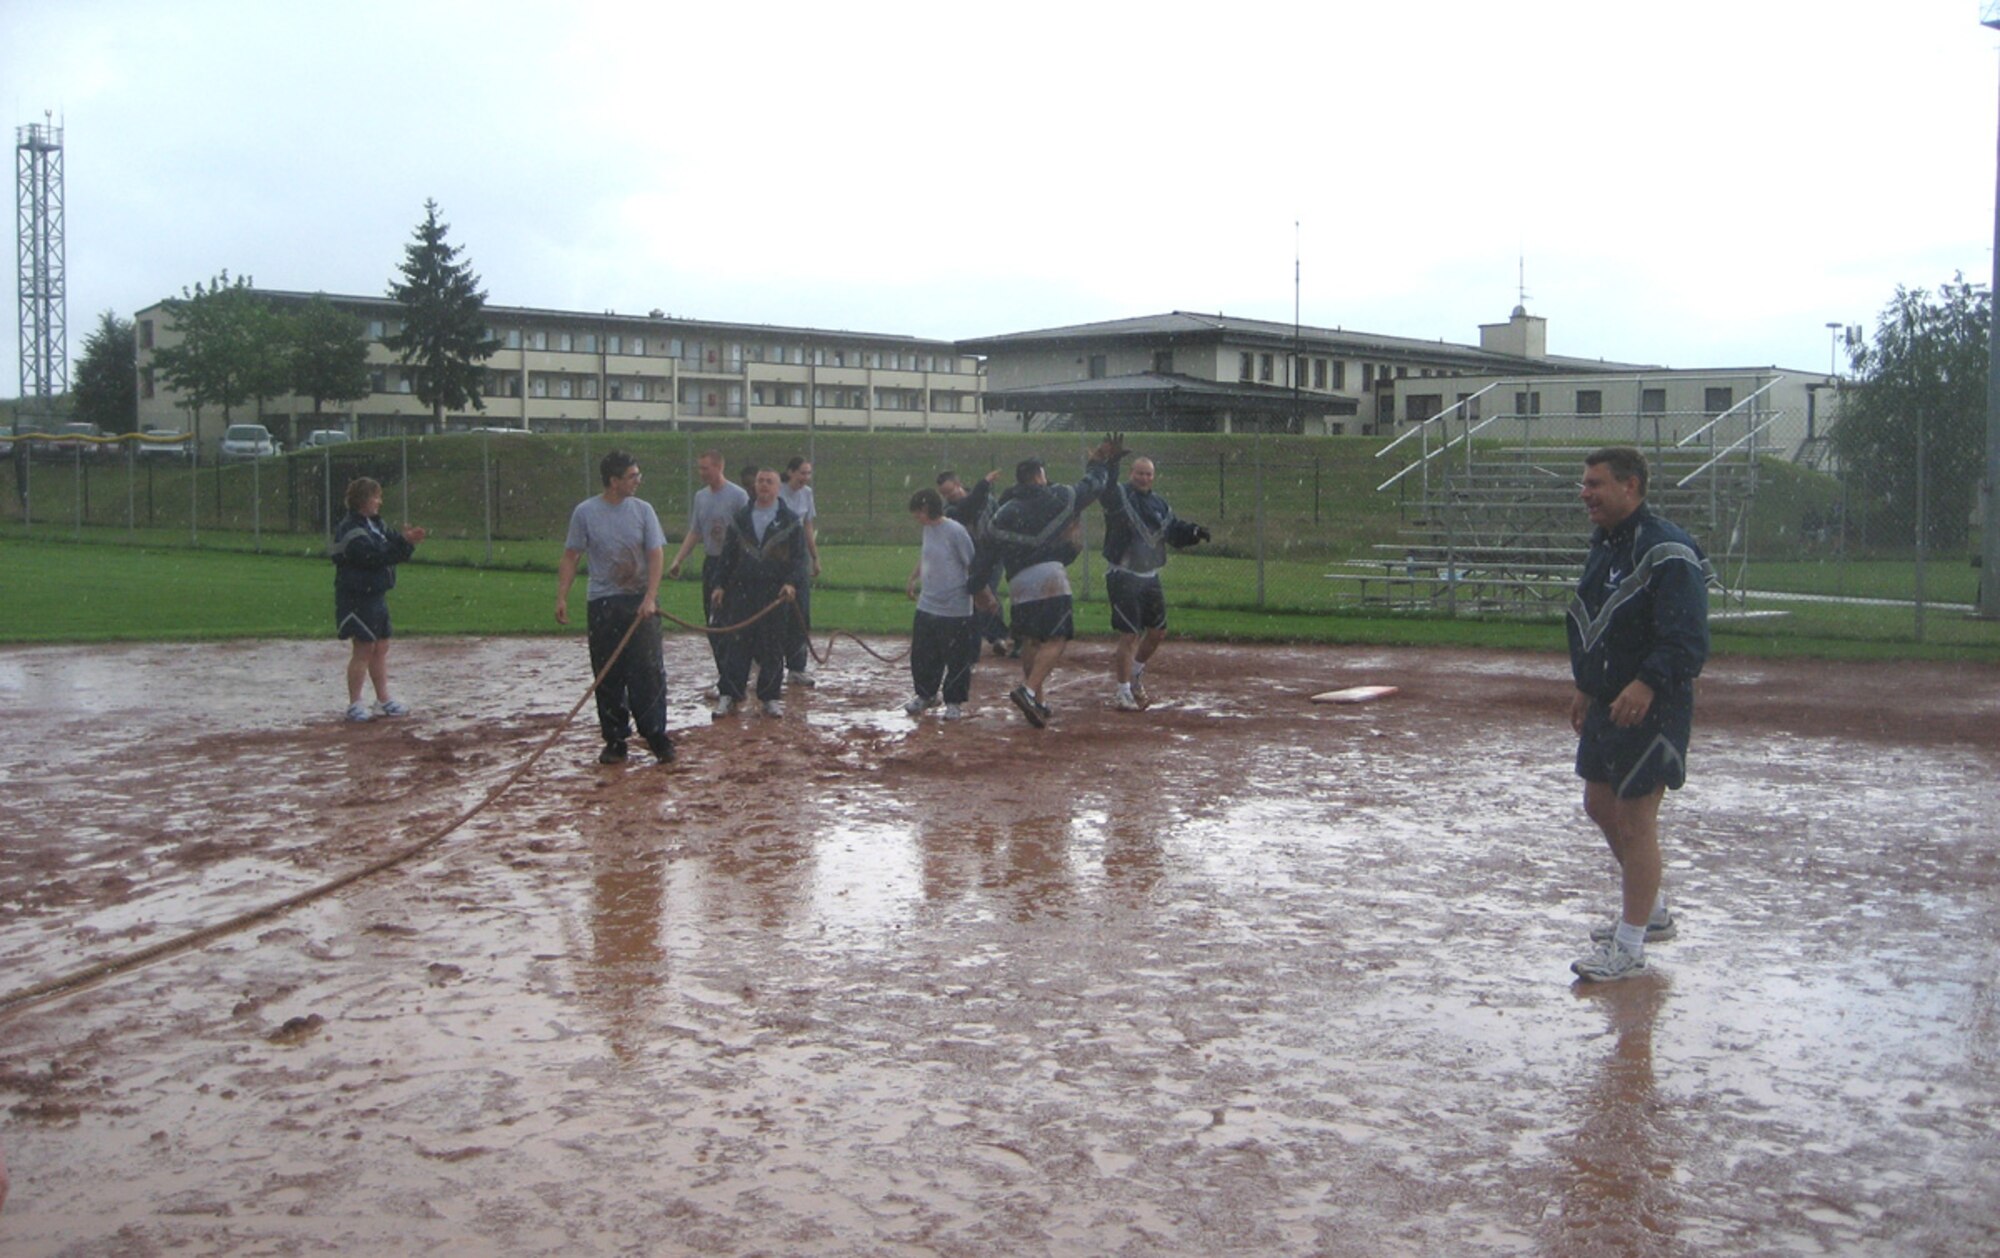 SPANGDAHLEM AIR BASE, Germany – Despite the rain and mud Airmen from the 52nd Fighter Wing prepare to begin tug-of-war during the 52nd FW's Sport Day as Col. Lt. Kevin Benneet, 52nd Communications Squadron commander looks on July 2, 2007. The 52nd CS team was the overall winner for Sports Day. (U.S. Air Force photo)